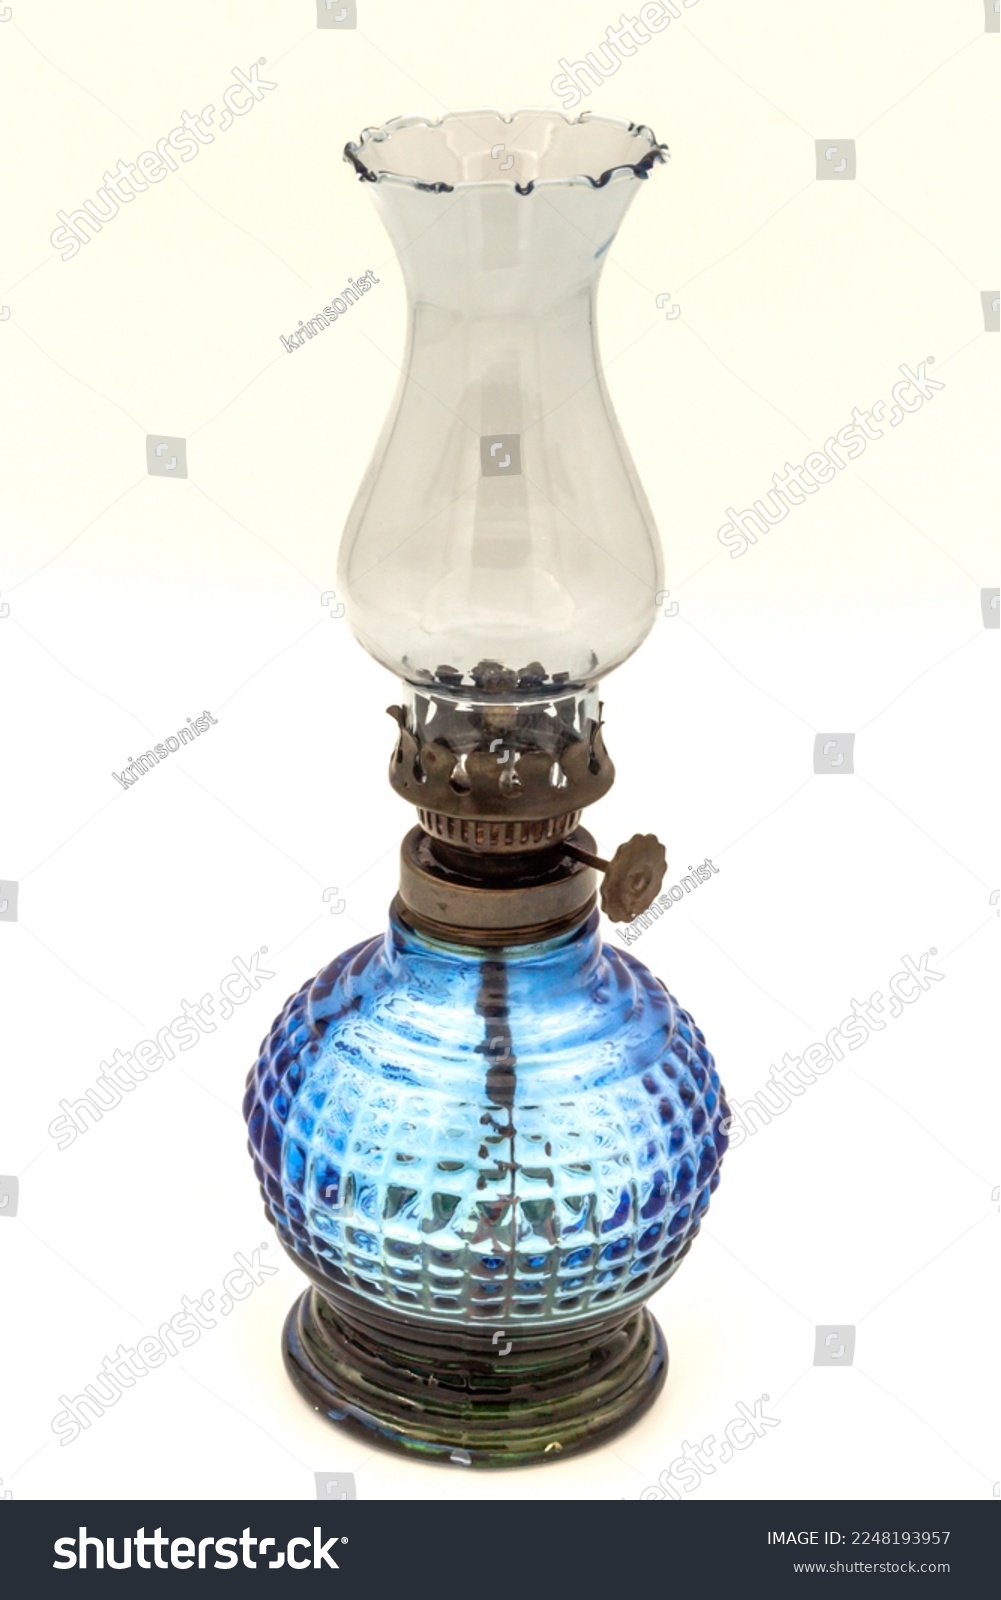 Blue colored glass oil lamp with old weathered and rusted glass. Close-up, on a white background. #2248193957